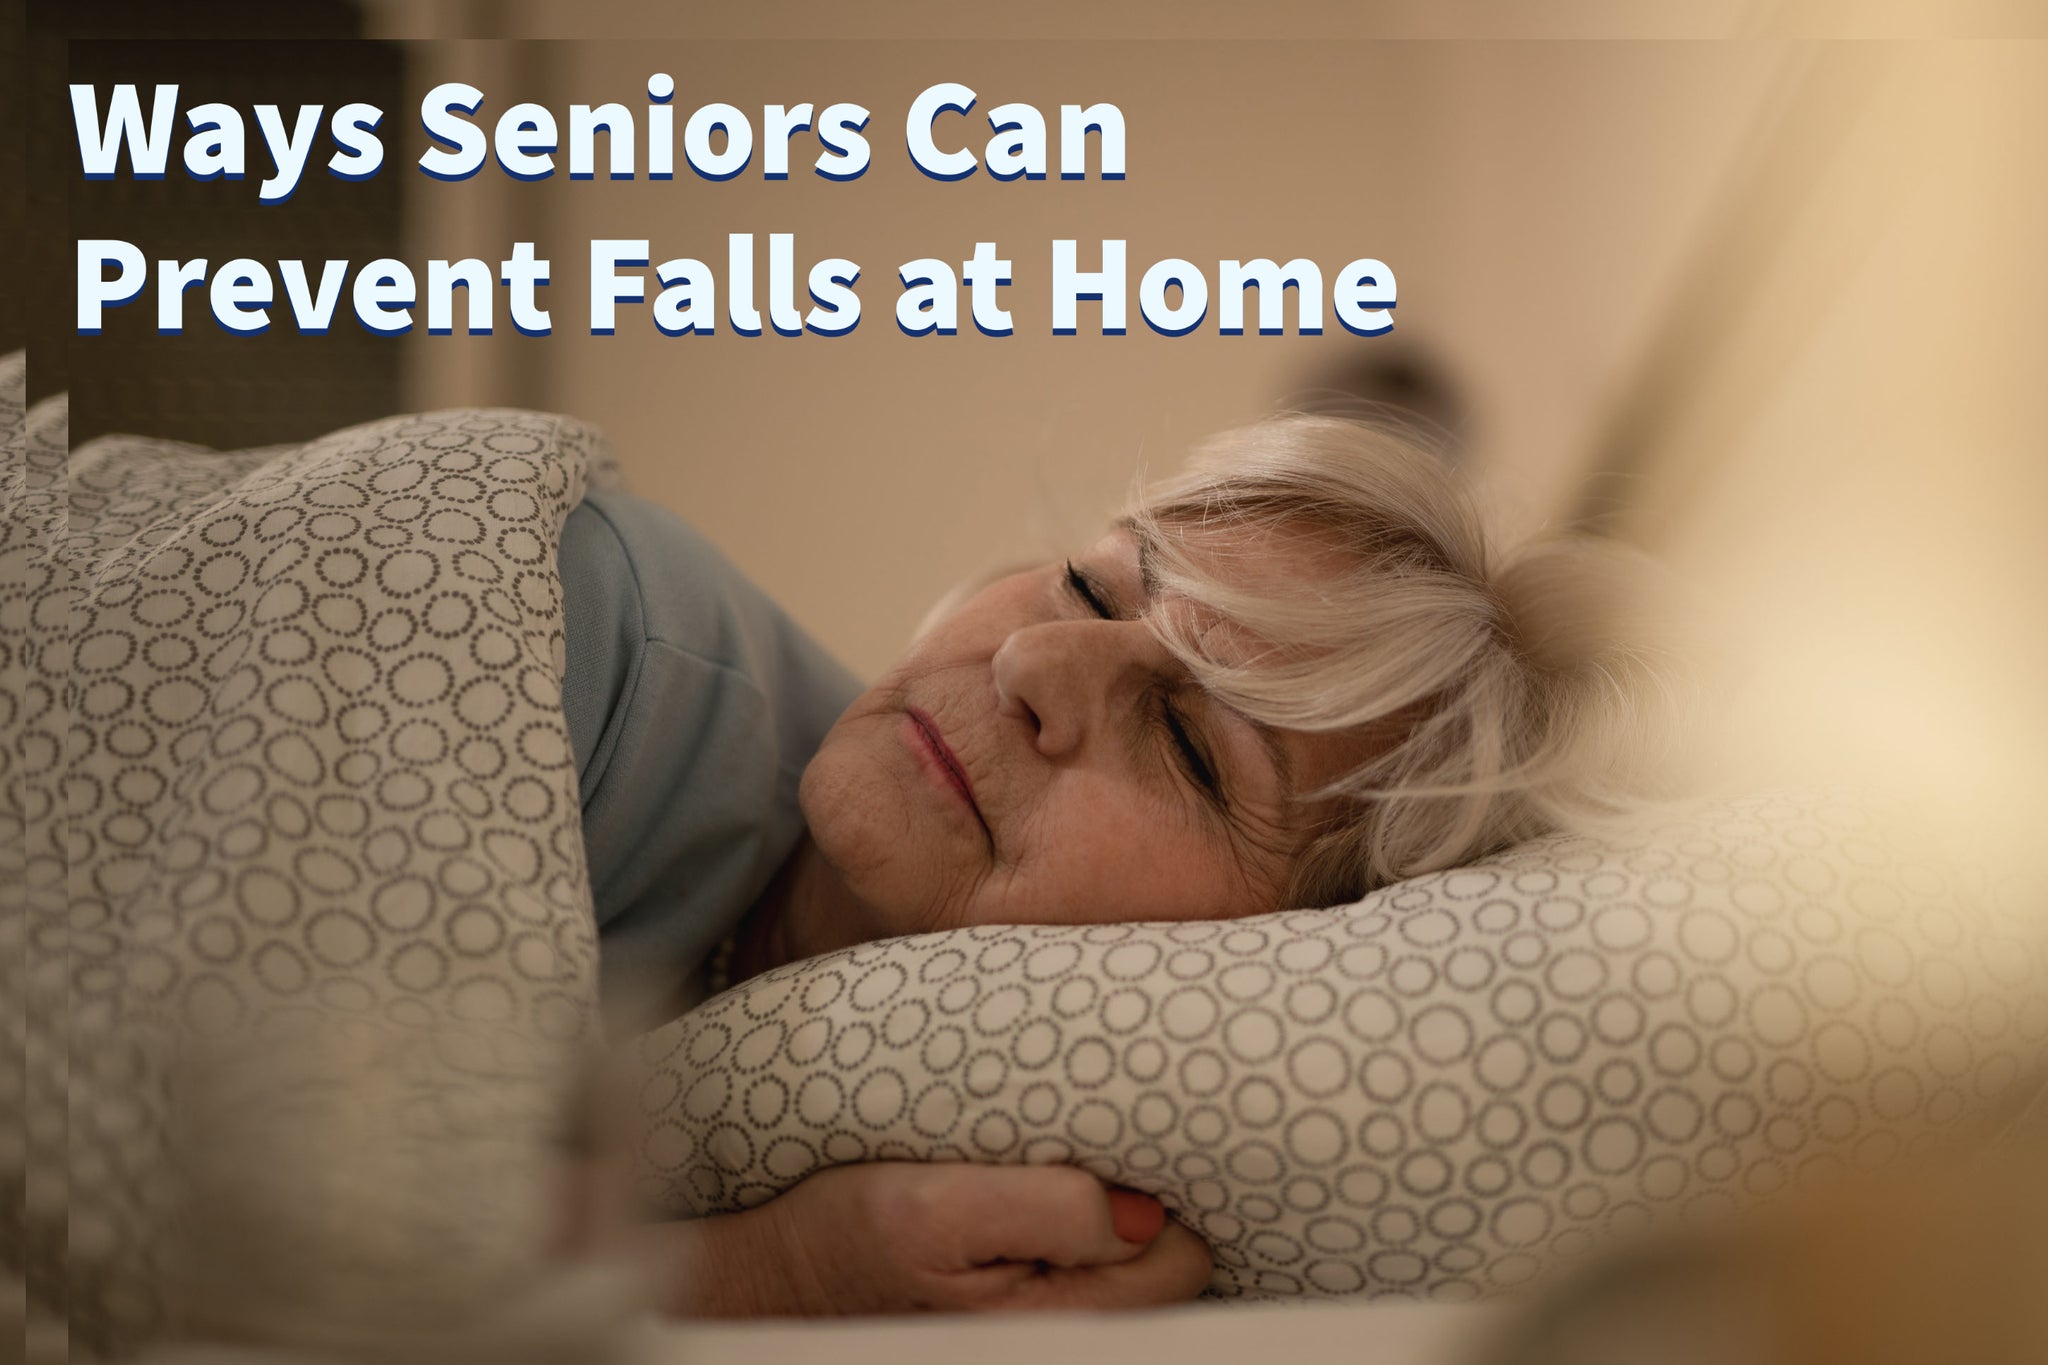 Ways Seniors Can Prevent Falls at Home